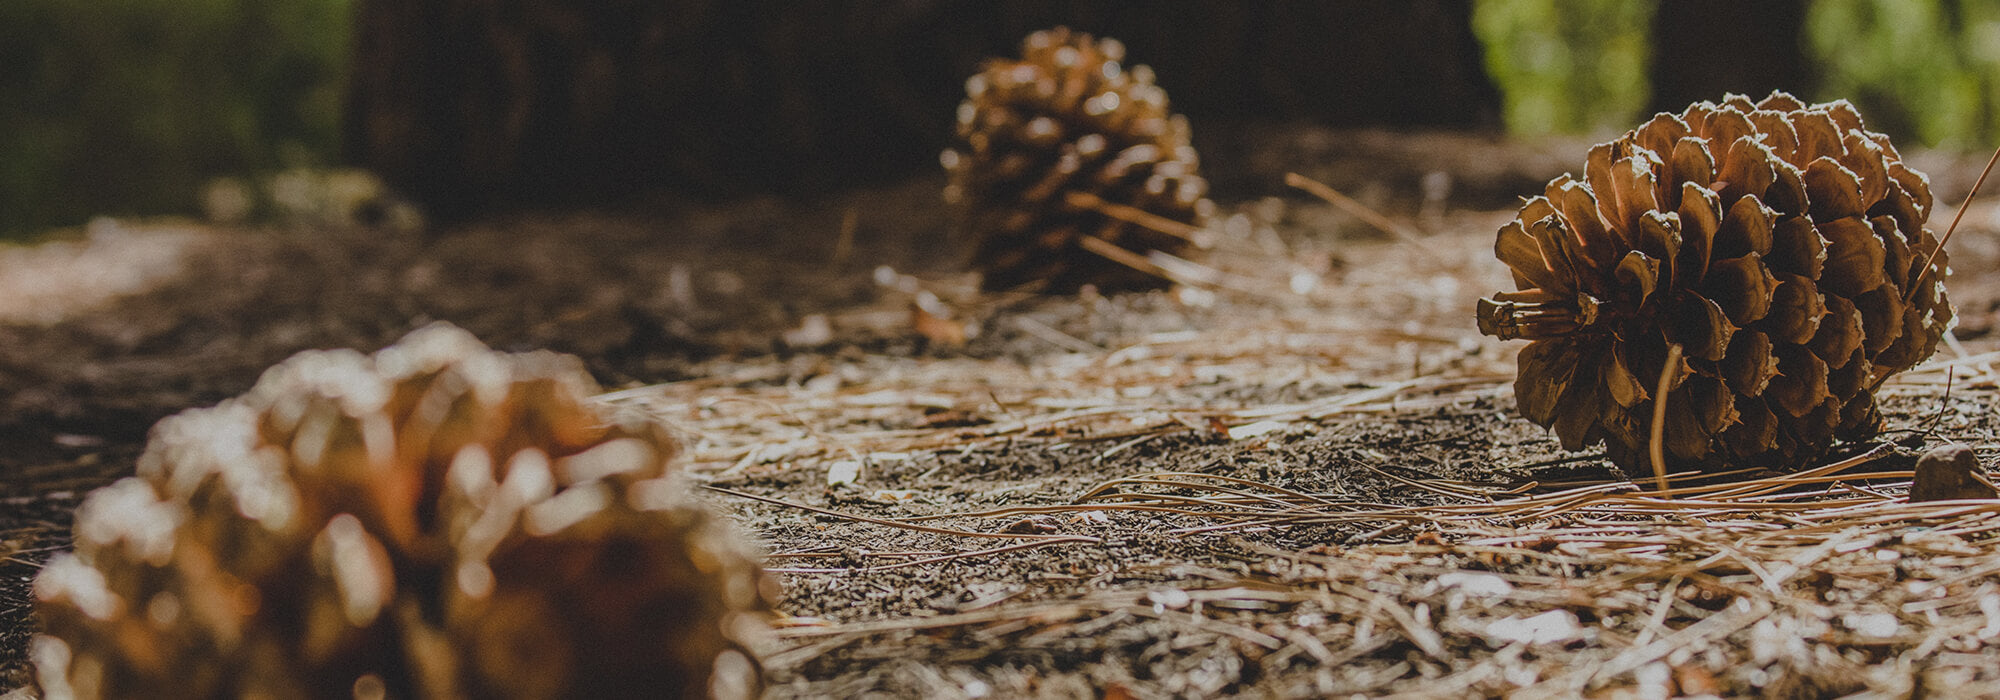 pinecones in the forest